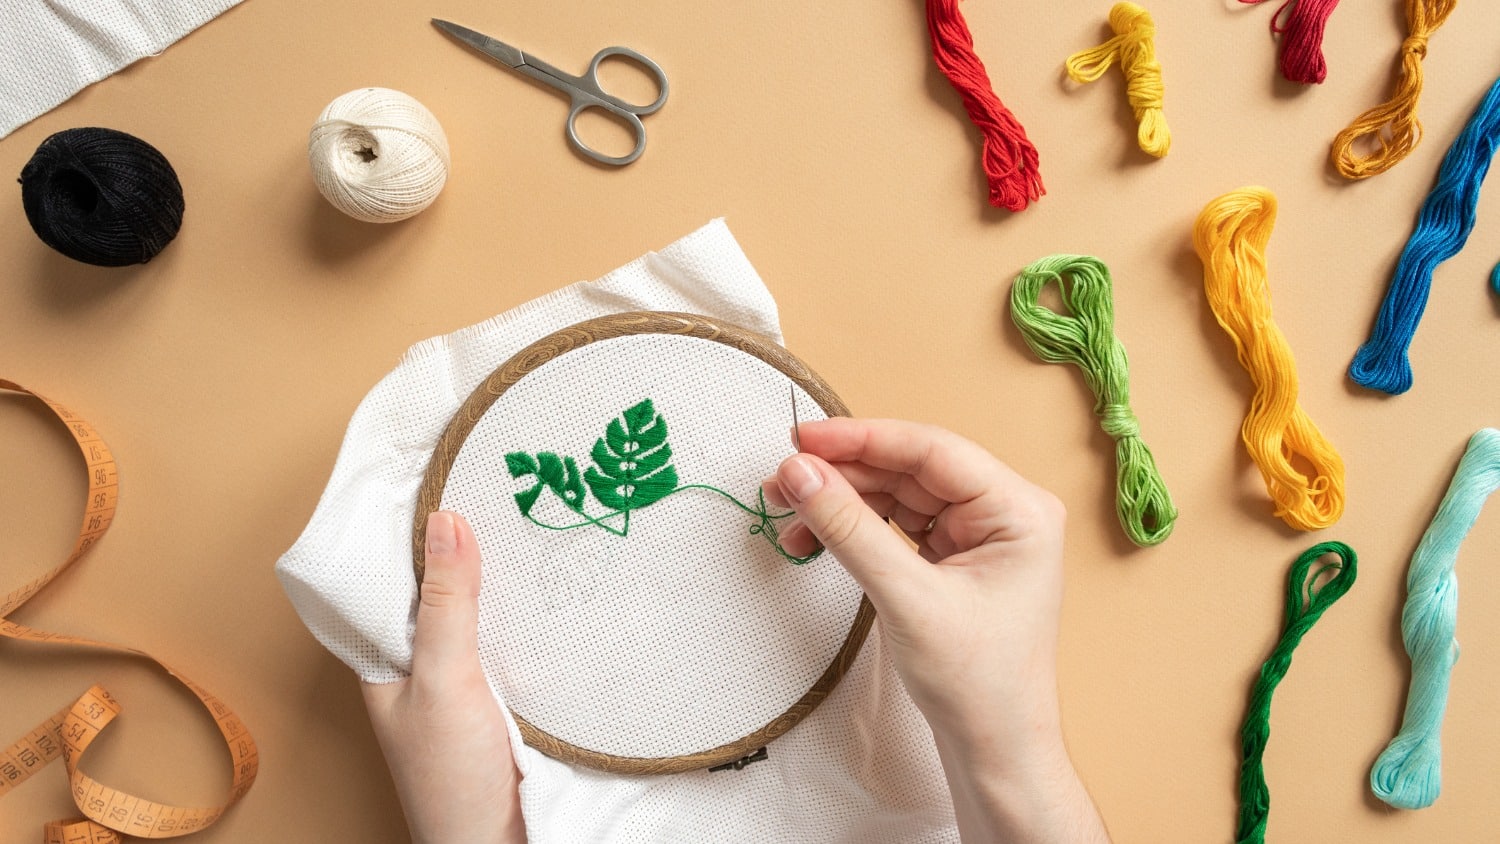 EMBROIDERY FOR BEGINNERS: Beginners Guide to Embroidery, Beadwork